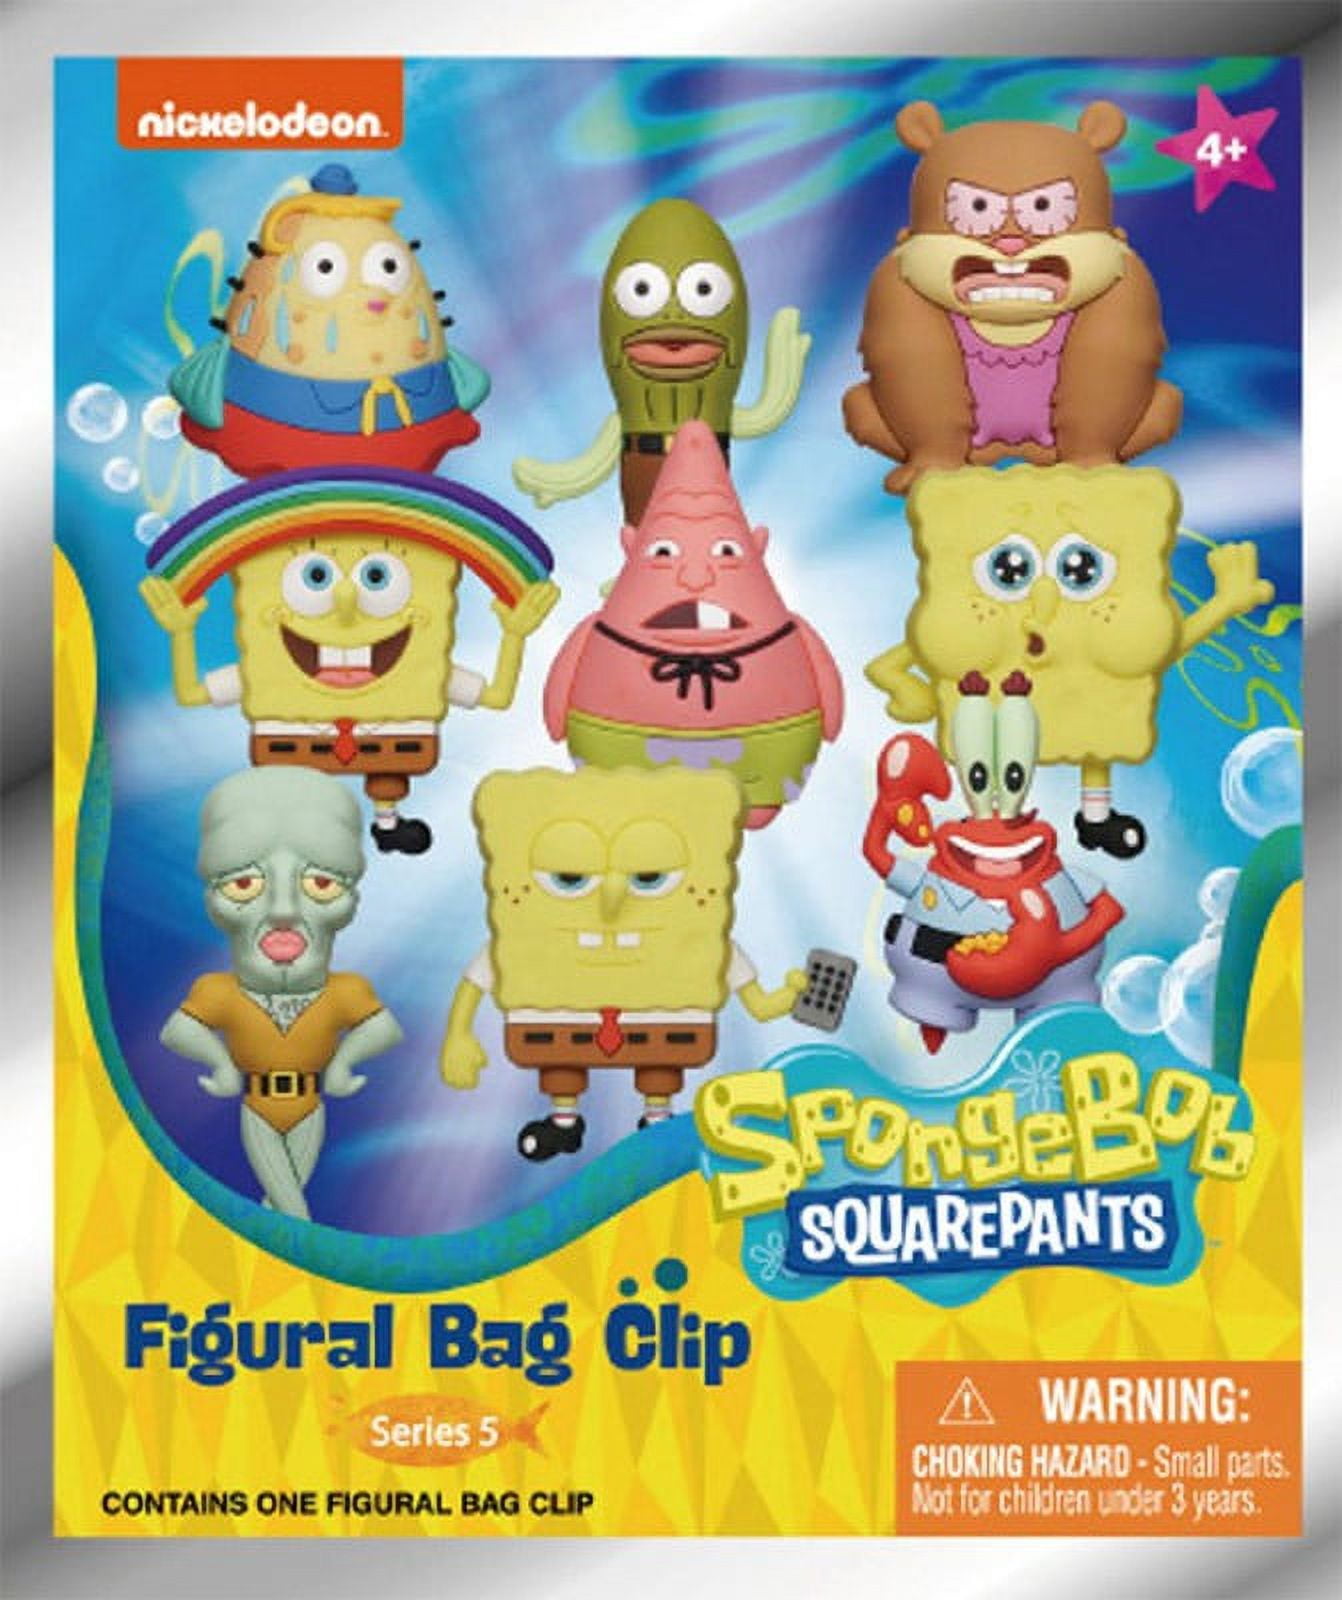  SpongeBob SquarePants Coloring and Activity Book Set with  Stickers (2 Books and Play Pack) : Toys & Games